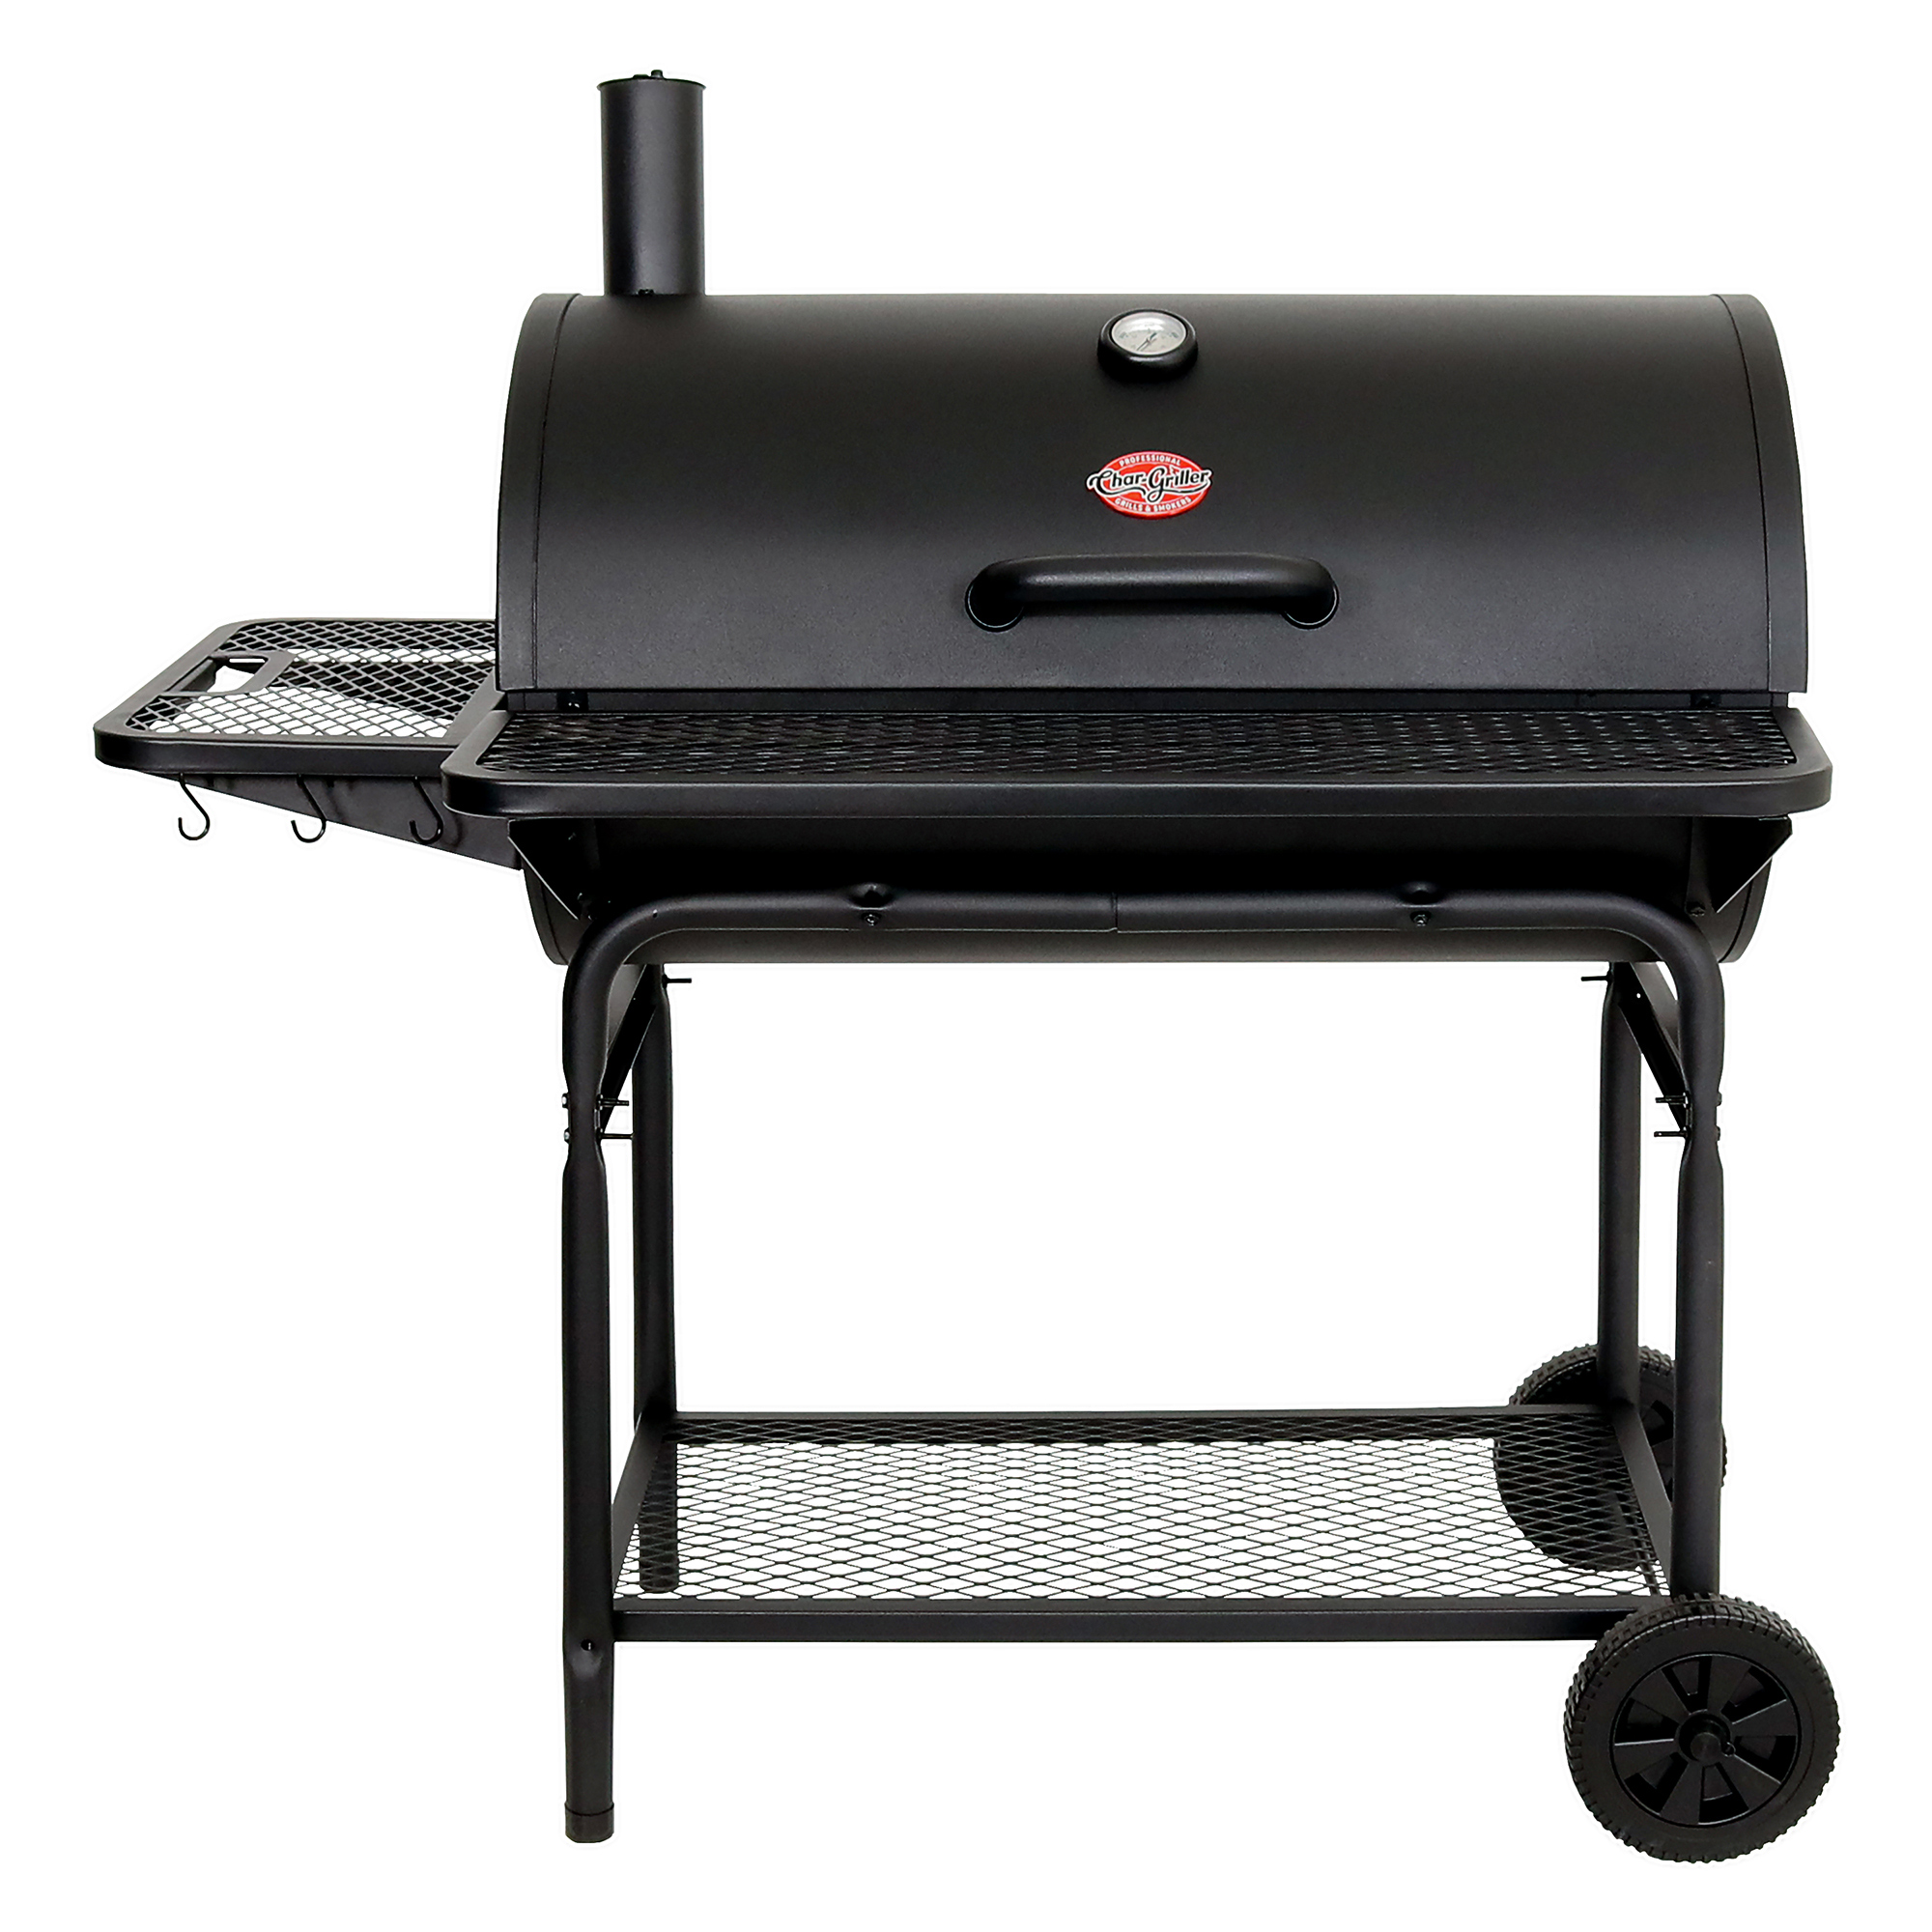 Char-Griller Pro Deluxe XL Charcoal Barrel Grill - image 1 of 8